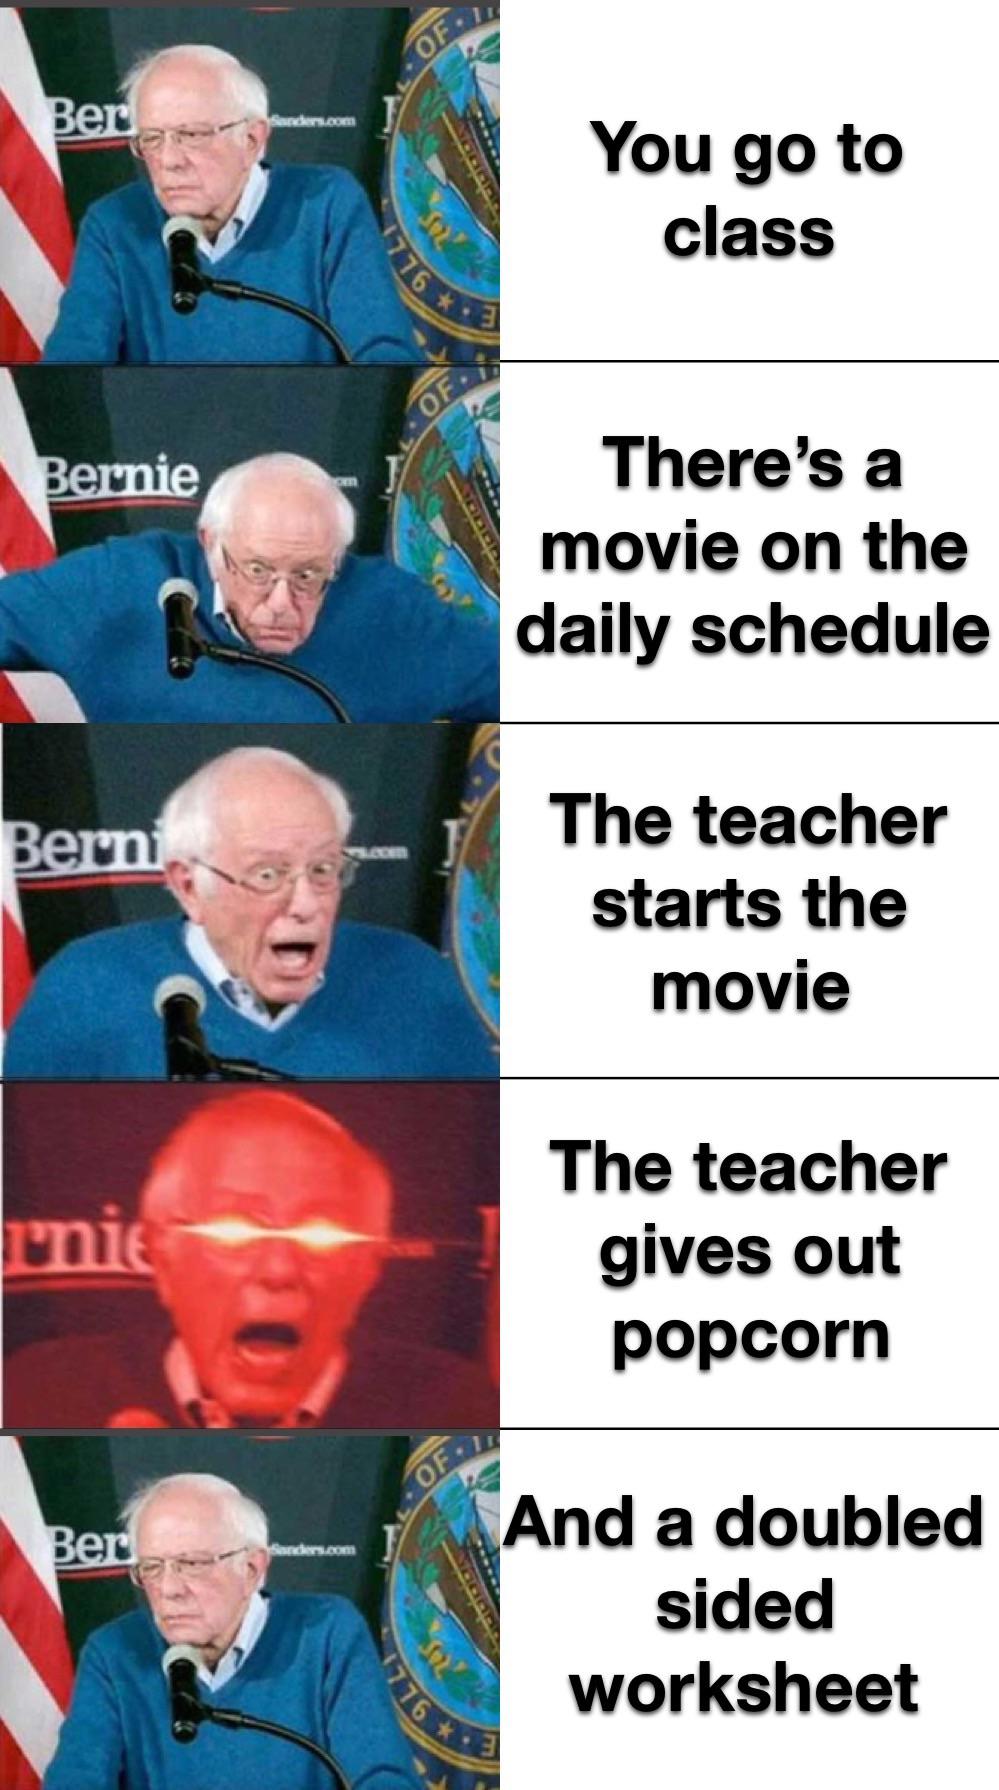 photo caption - Ofly Ber Sanders.com You go to class Of. Bernie There's a movie on the daily schedule Bern The teacher starts the movie rnie The teacher gives out popcorn Of Ber And a doubled sided worksheet 776